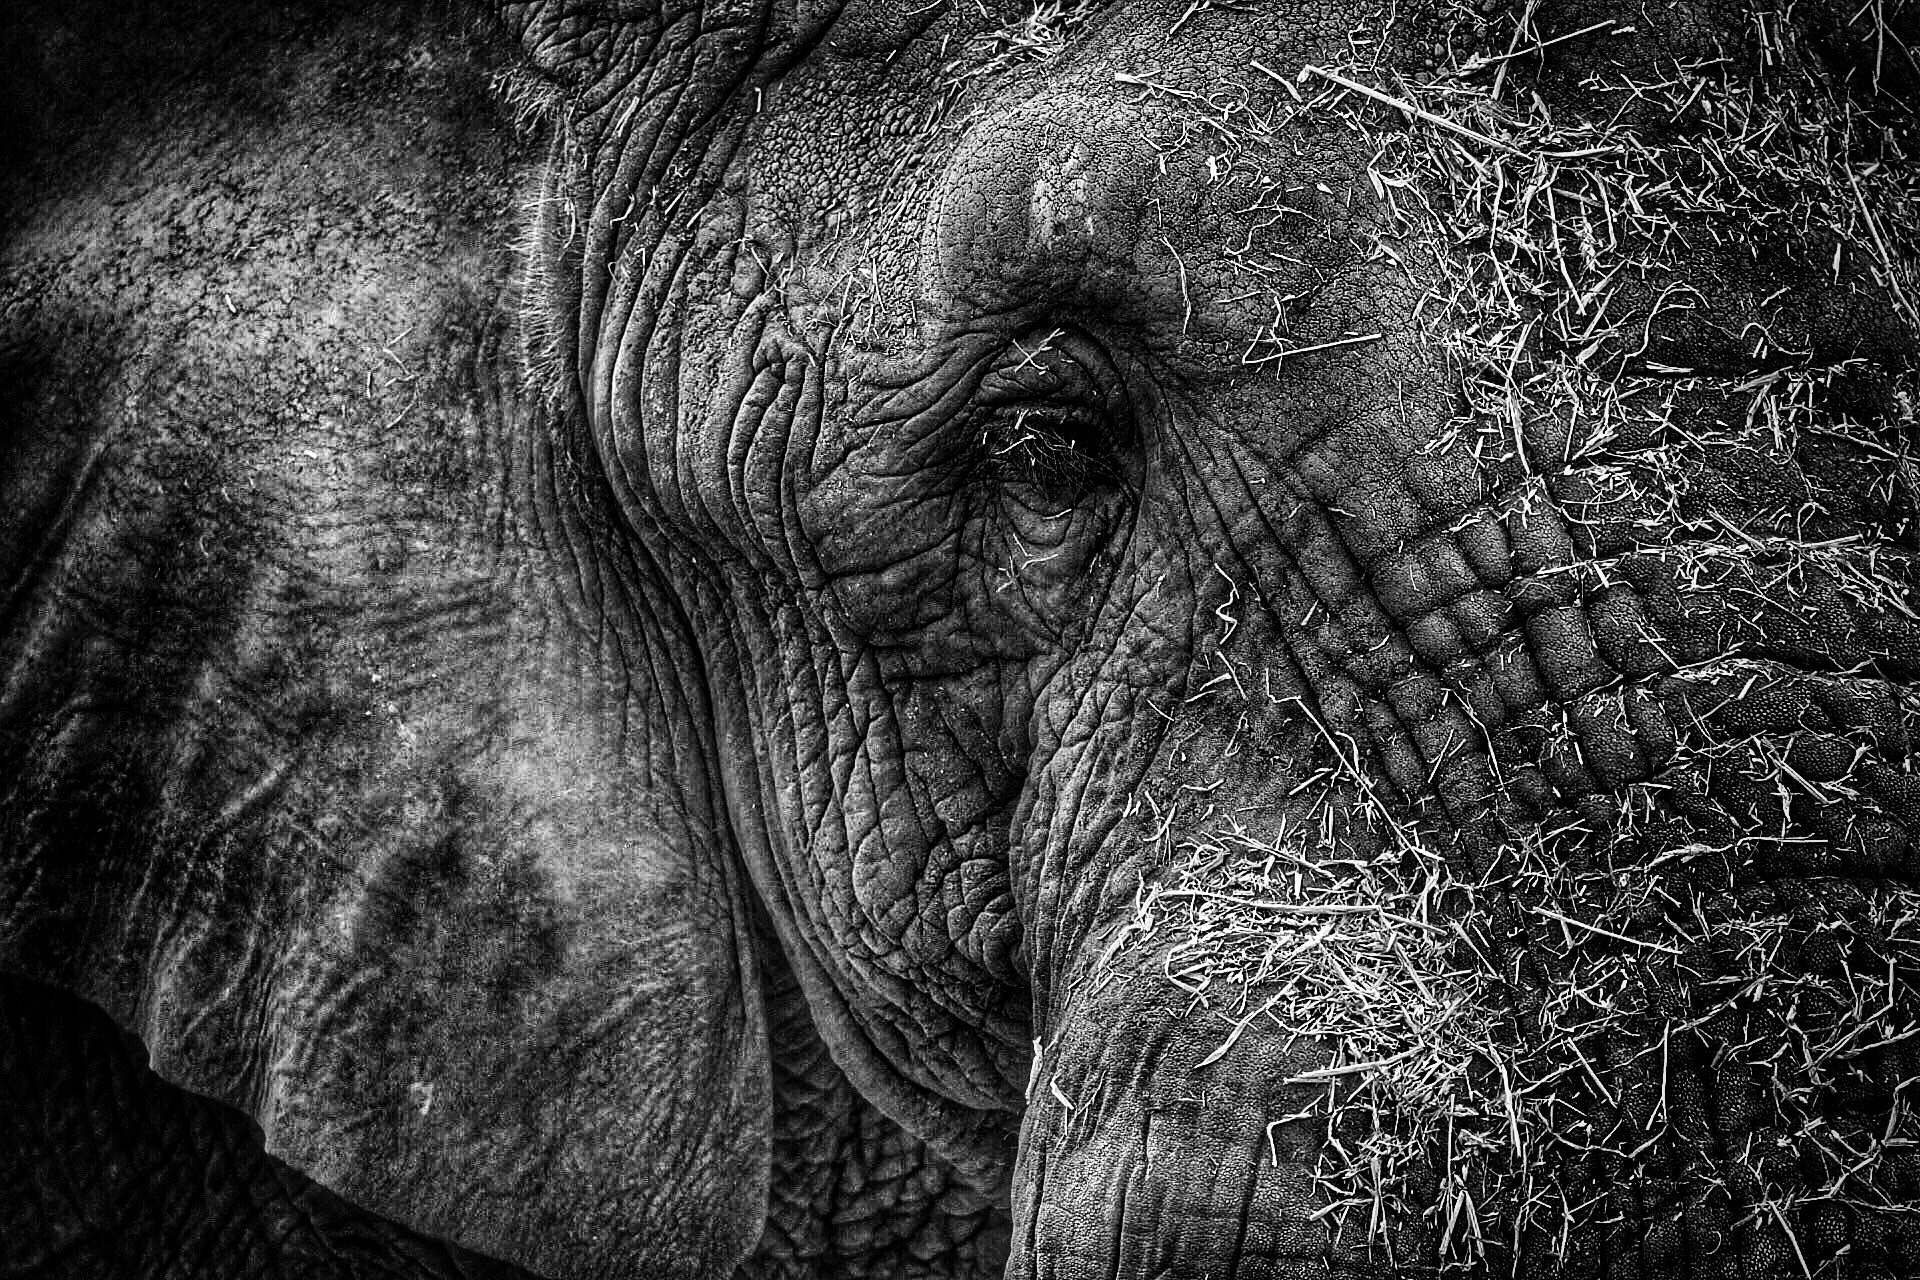 An old elephant in a monochrome photo